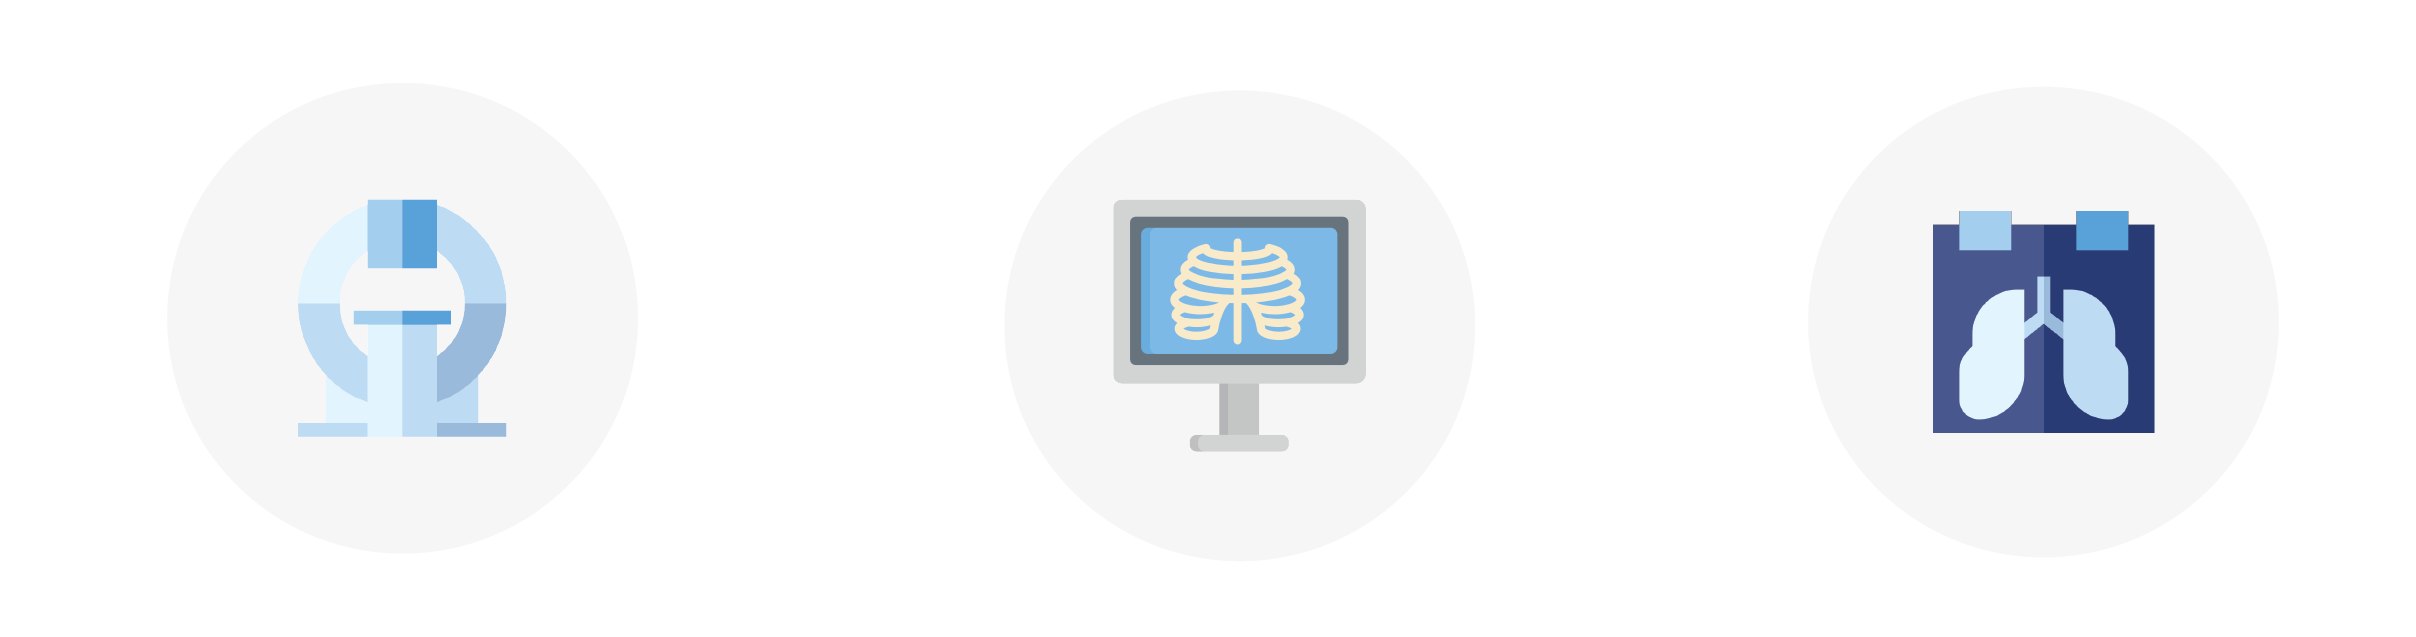 Graphic icons that showcase how to diagnose COPD.